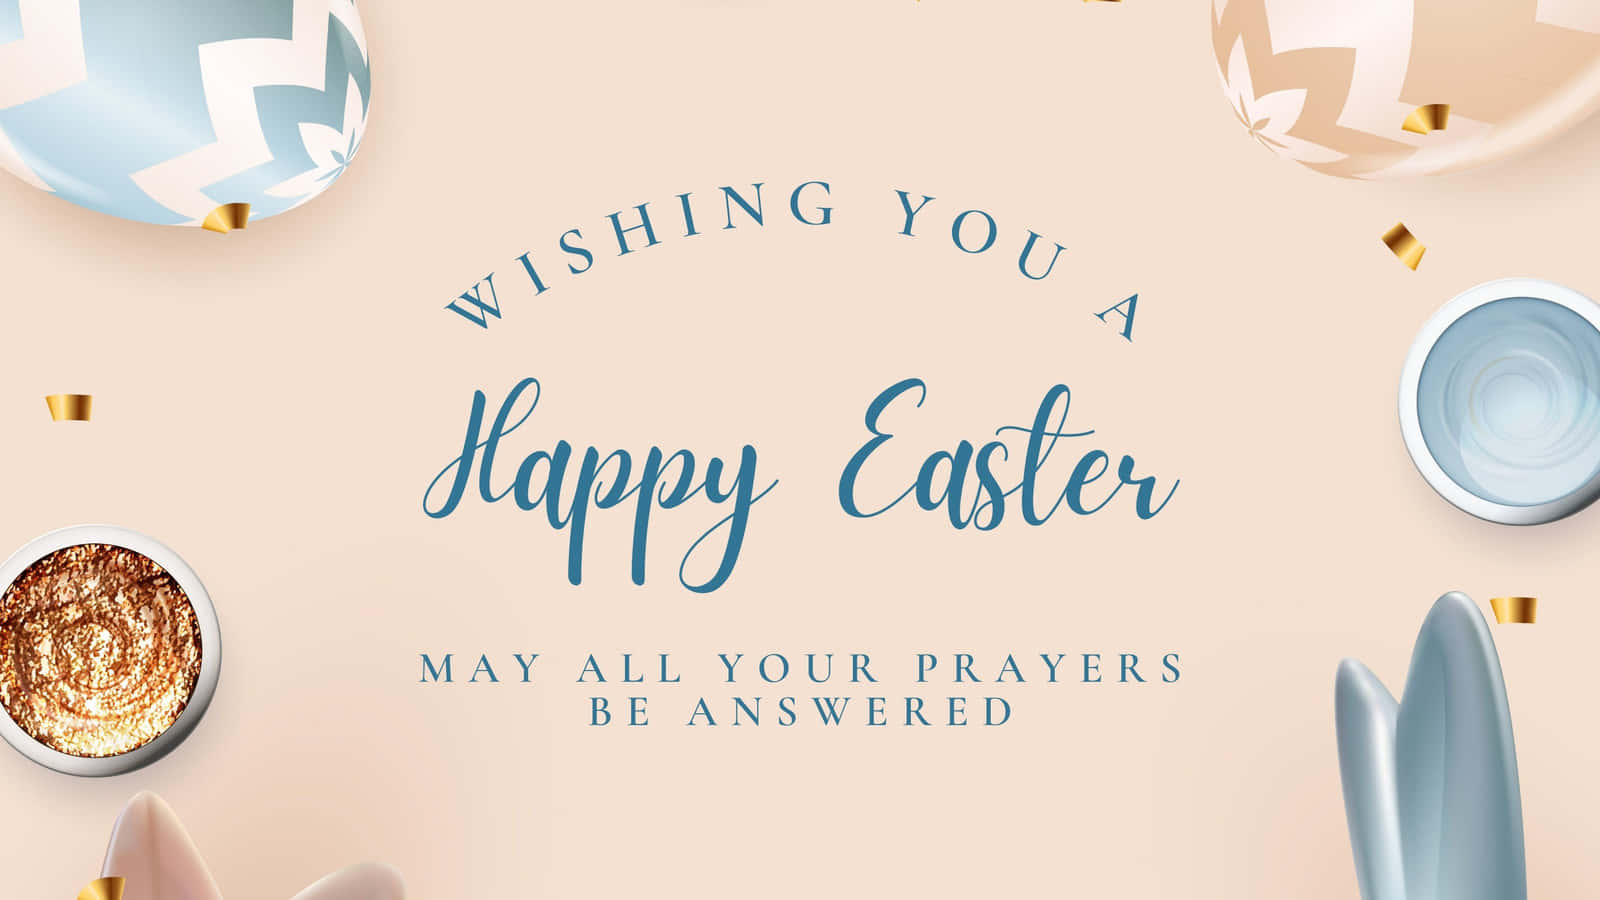 Celebrate Easter with your friends and family, no matter the distance.